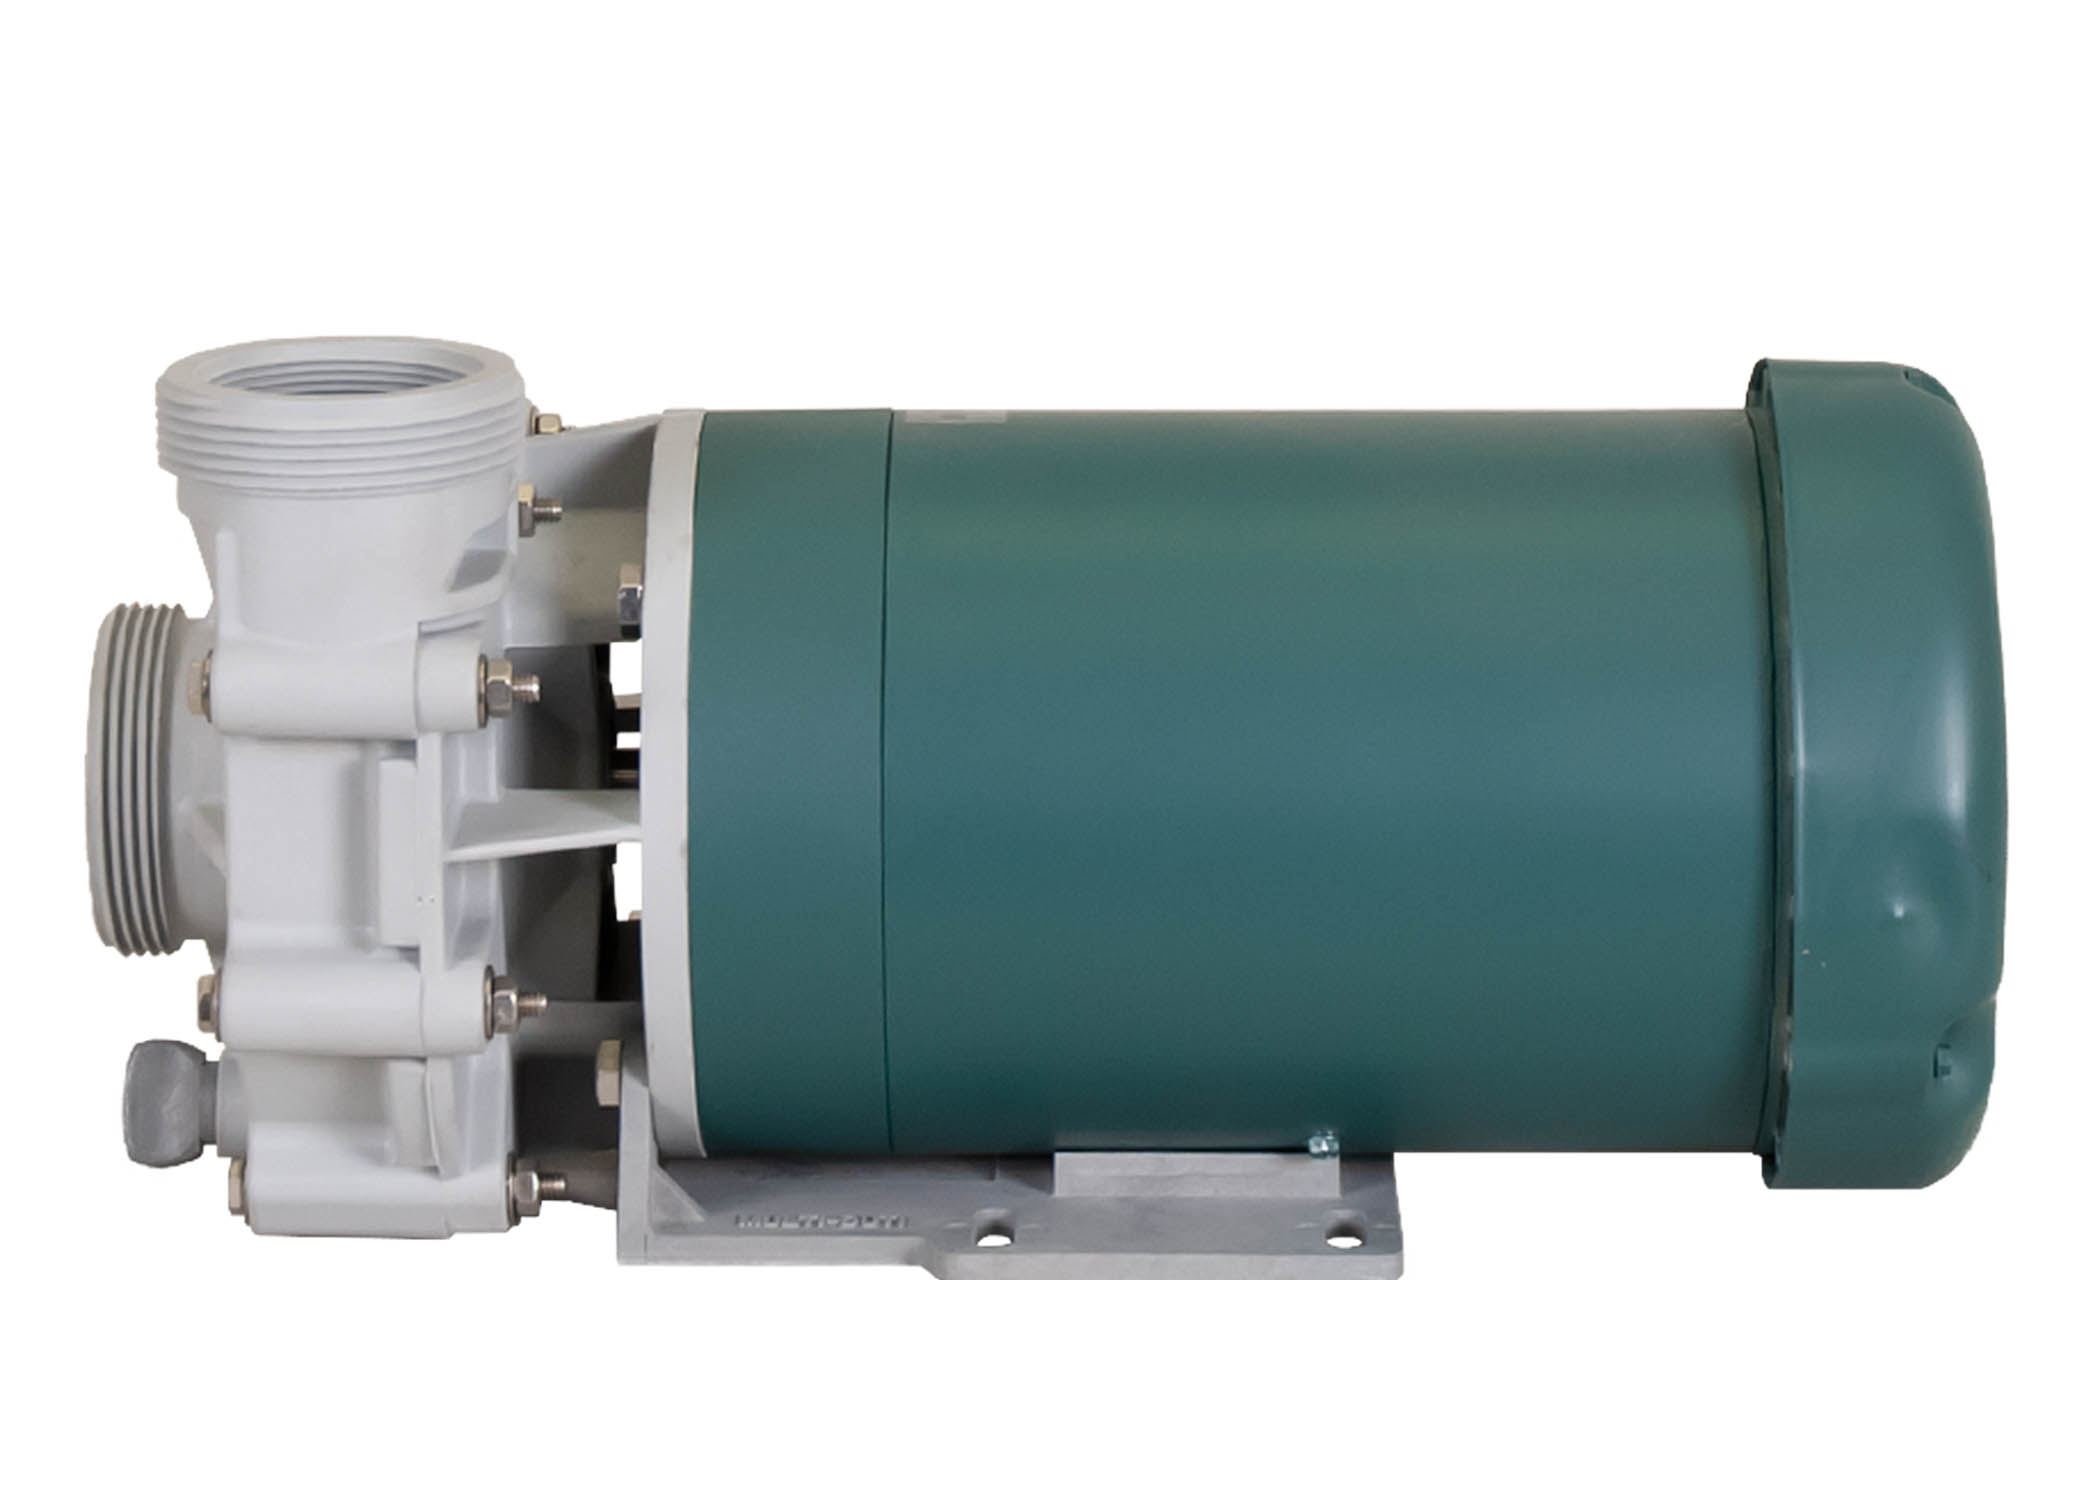 Advance 4000 Pump with green Leeson Motor right side view